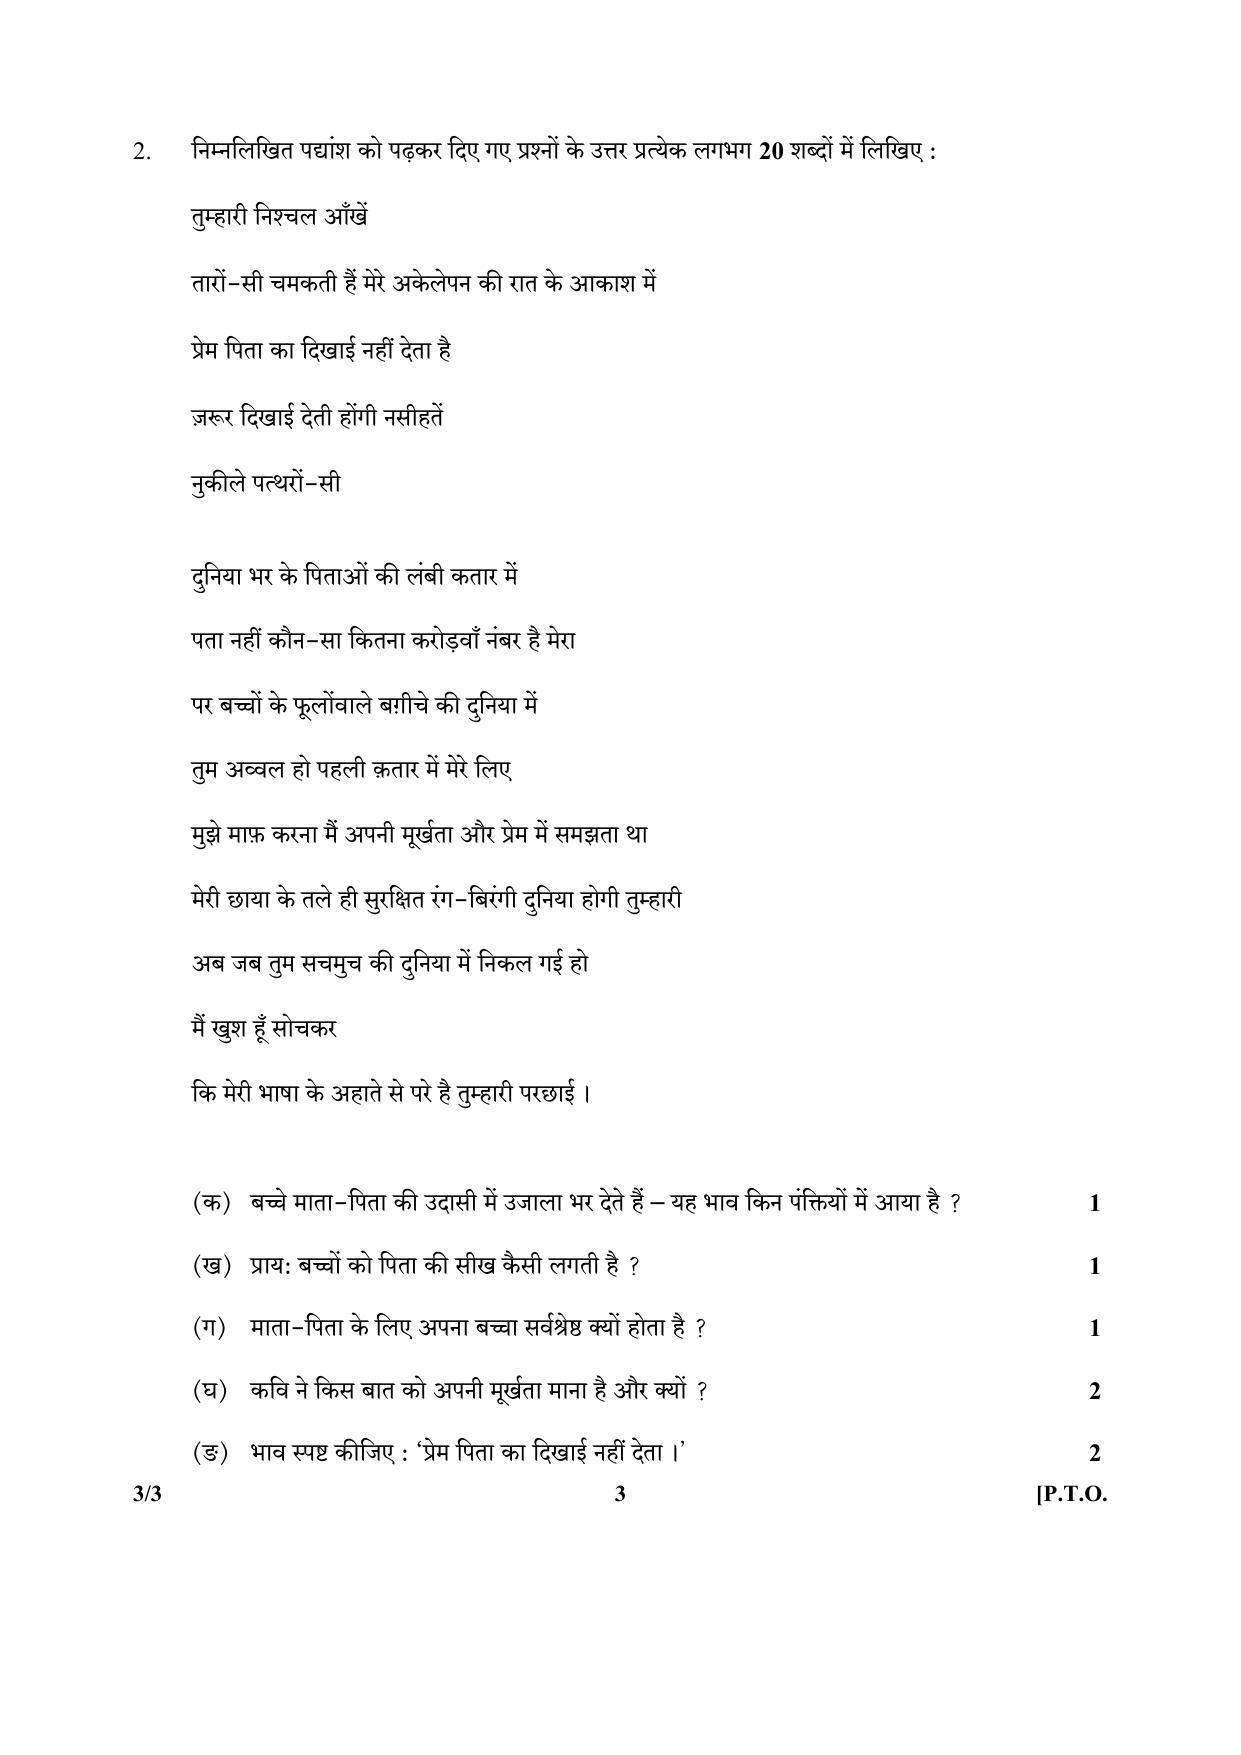 CBSE Class 10 3-3_Hindi SET-3 2018 Question Paper - Page 3